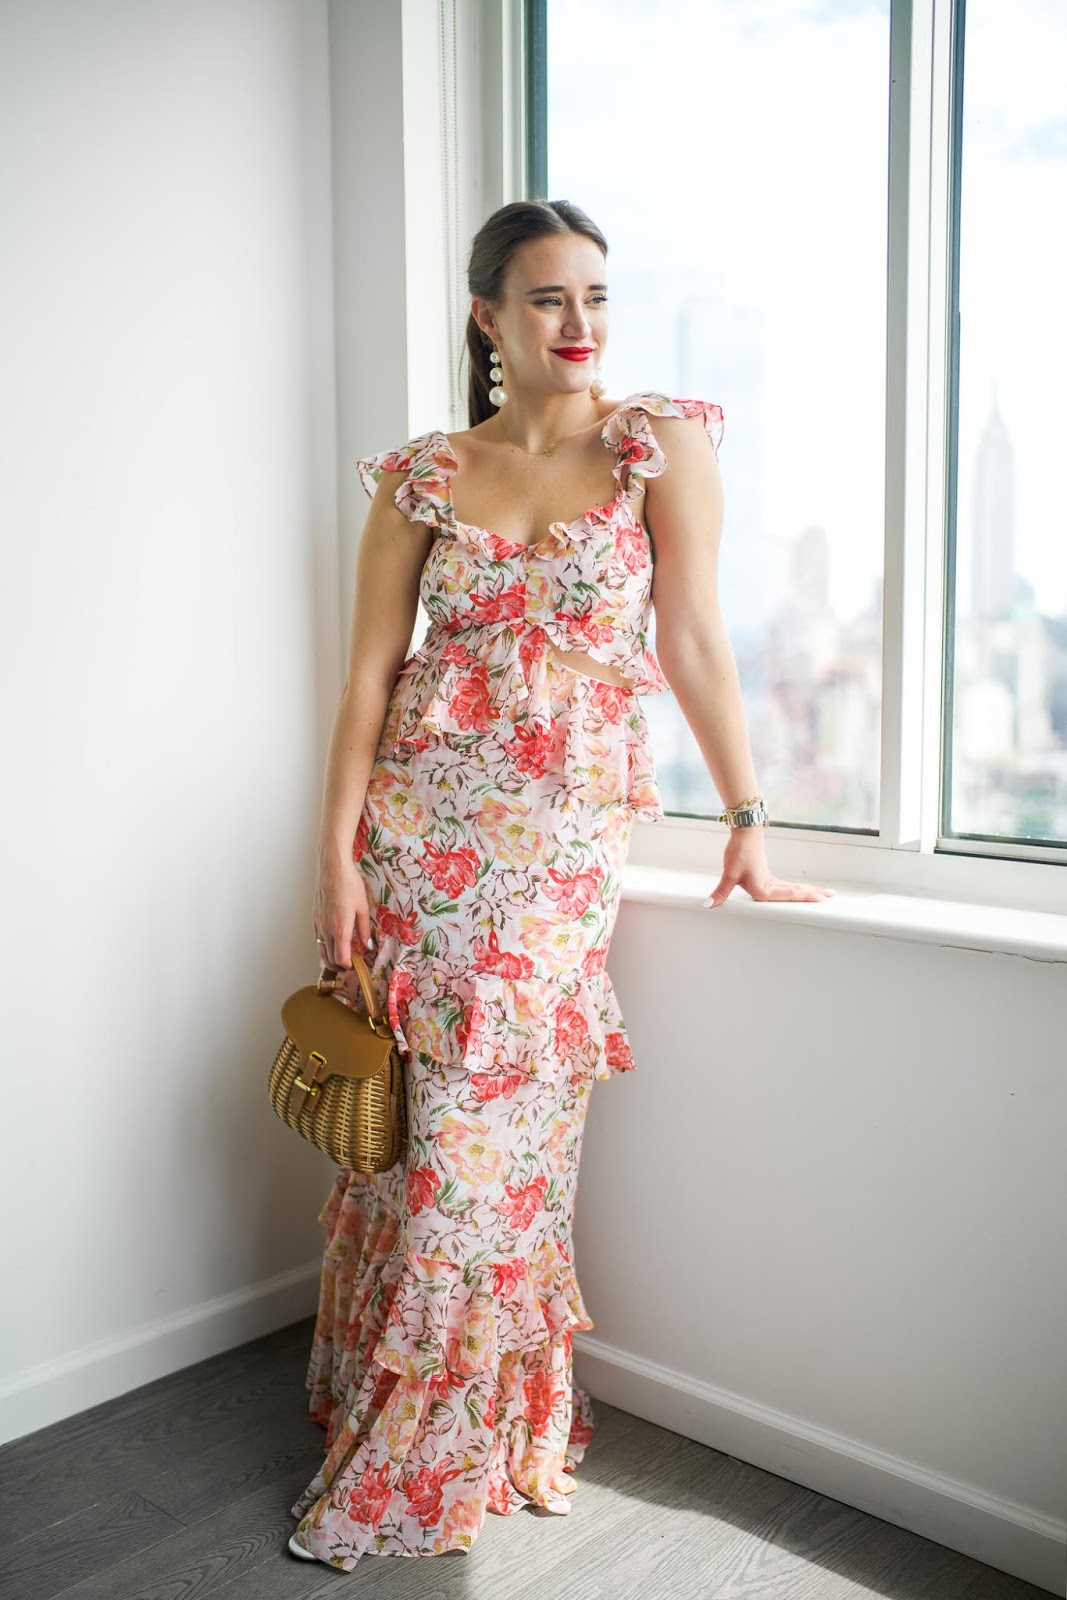 The Perfect Wedding Guest Dress from WAYF styled by popular New York fashion blogger, Covering the Bases